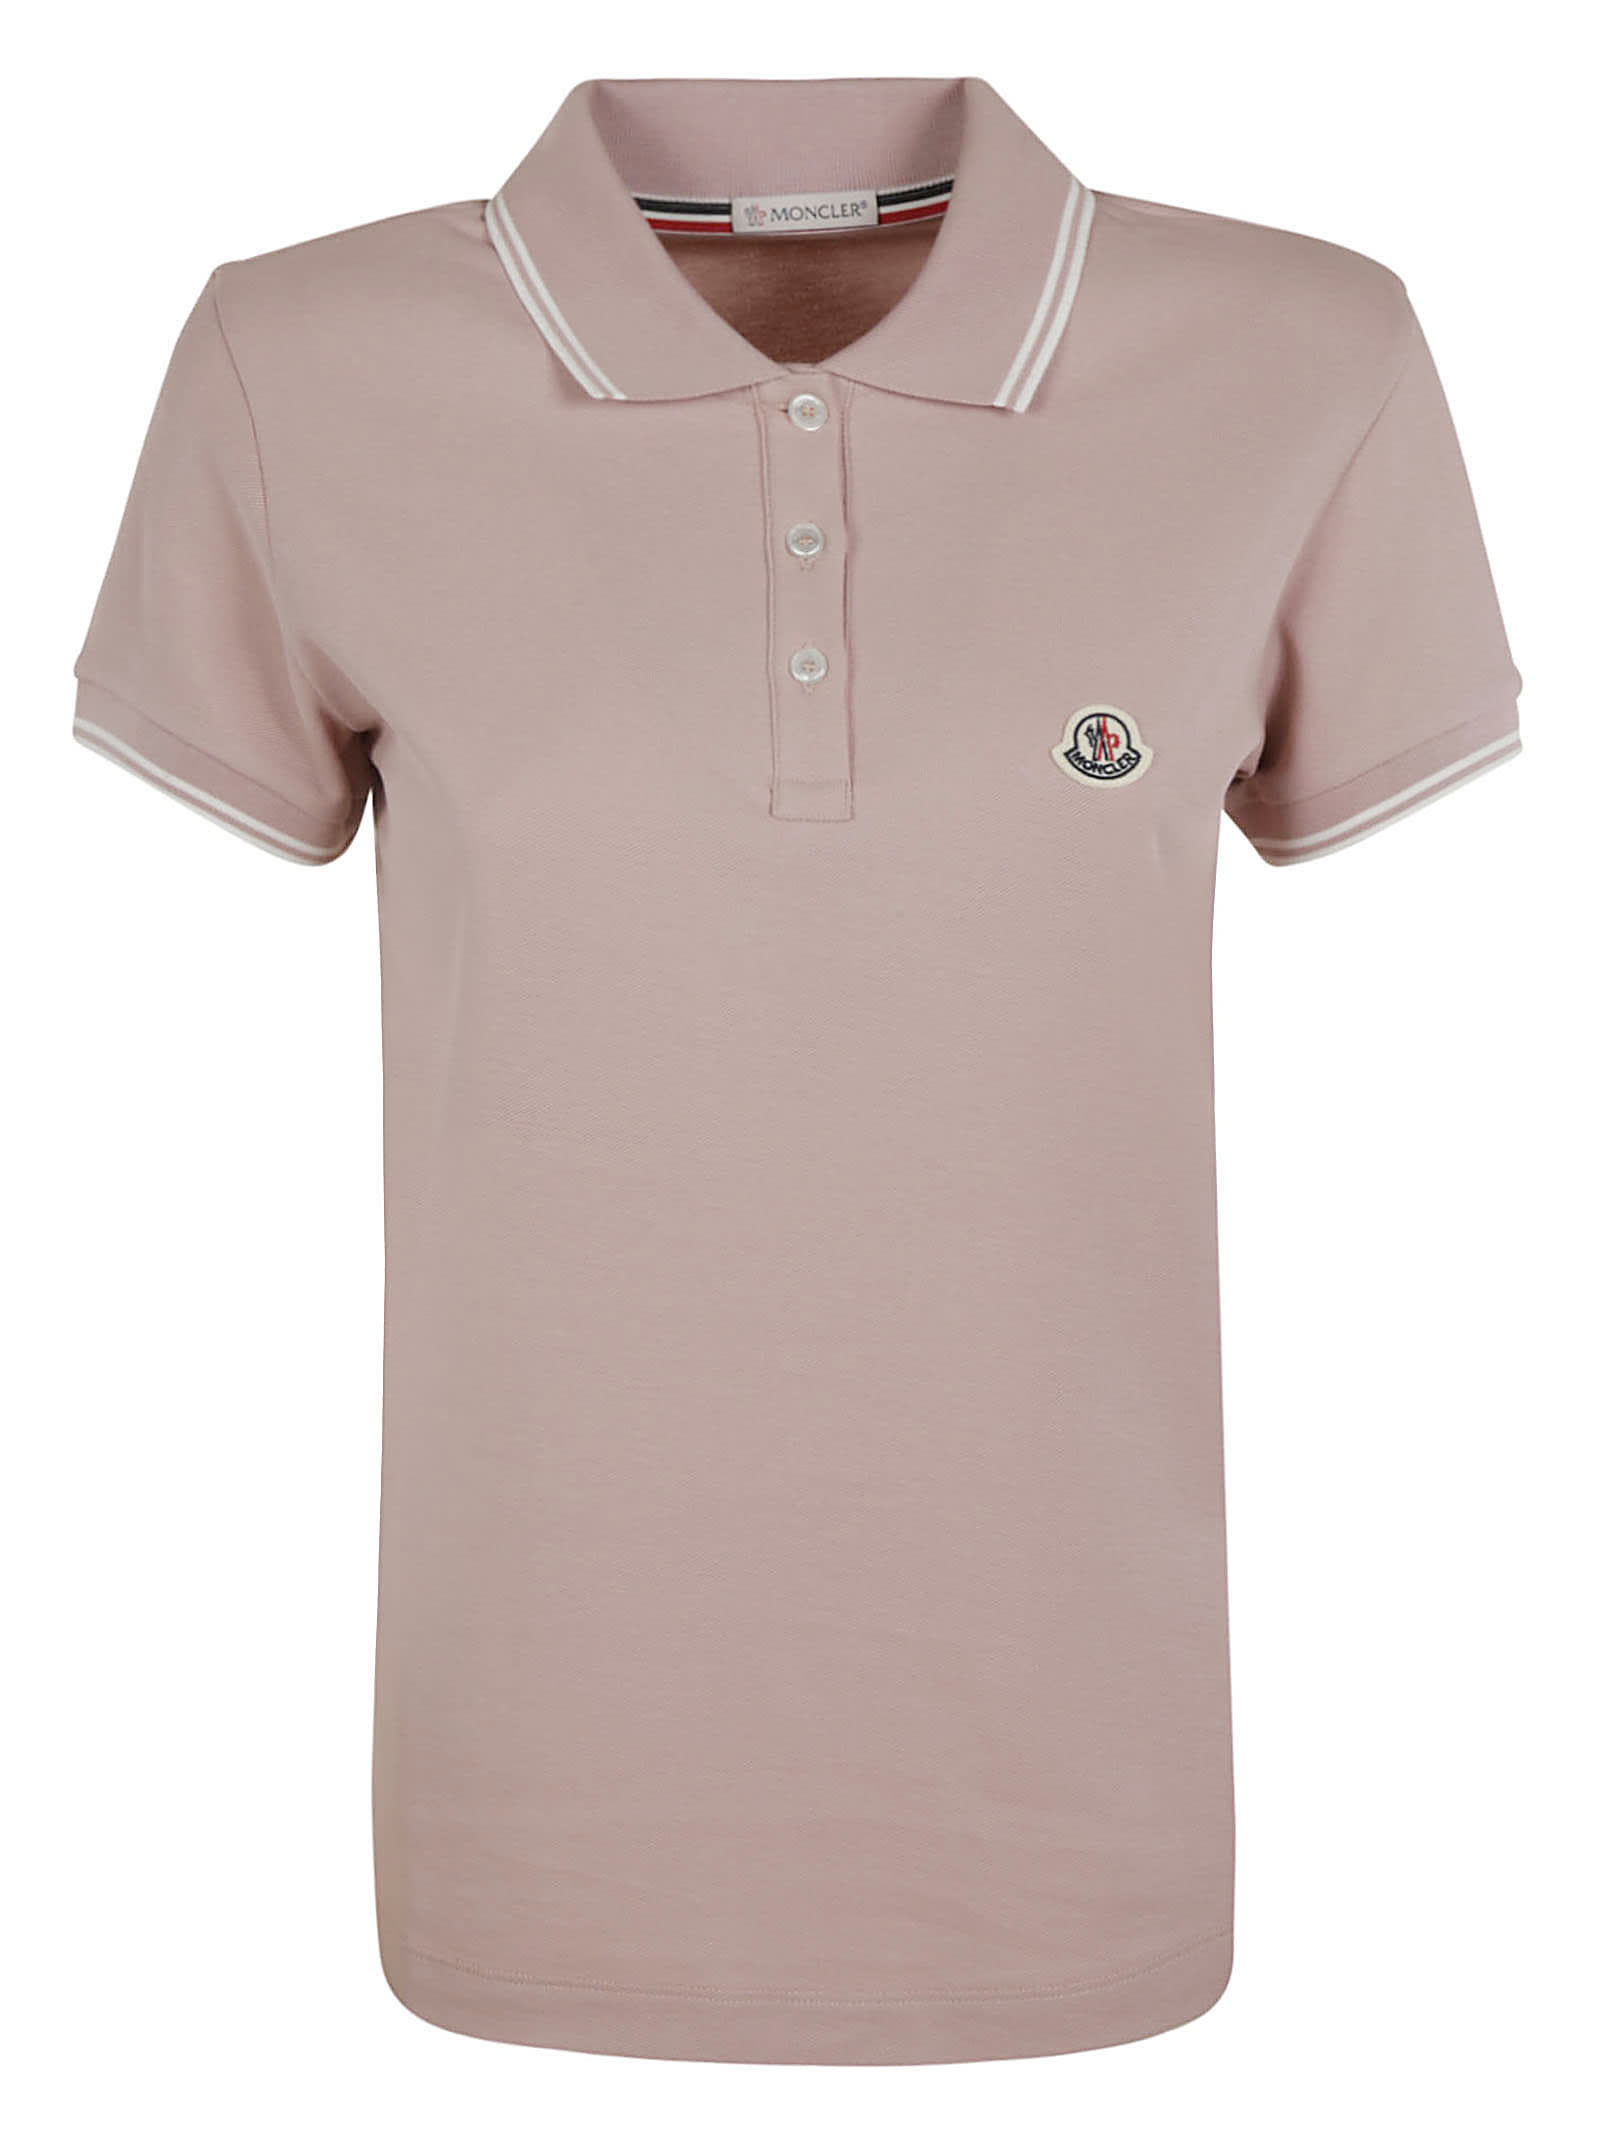 MONCLER LOGO PATCHED POLO SHIRT,11919178